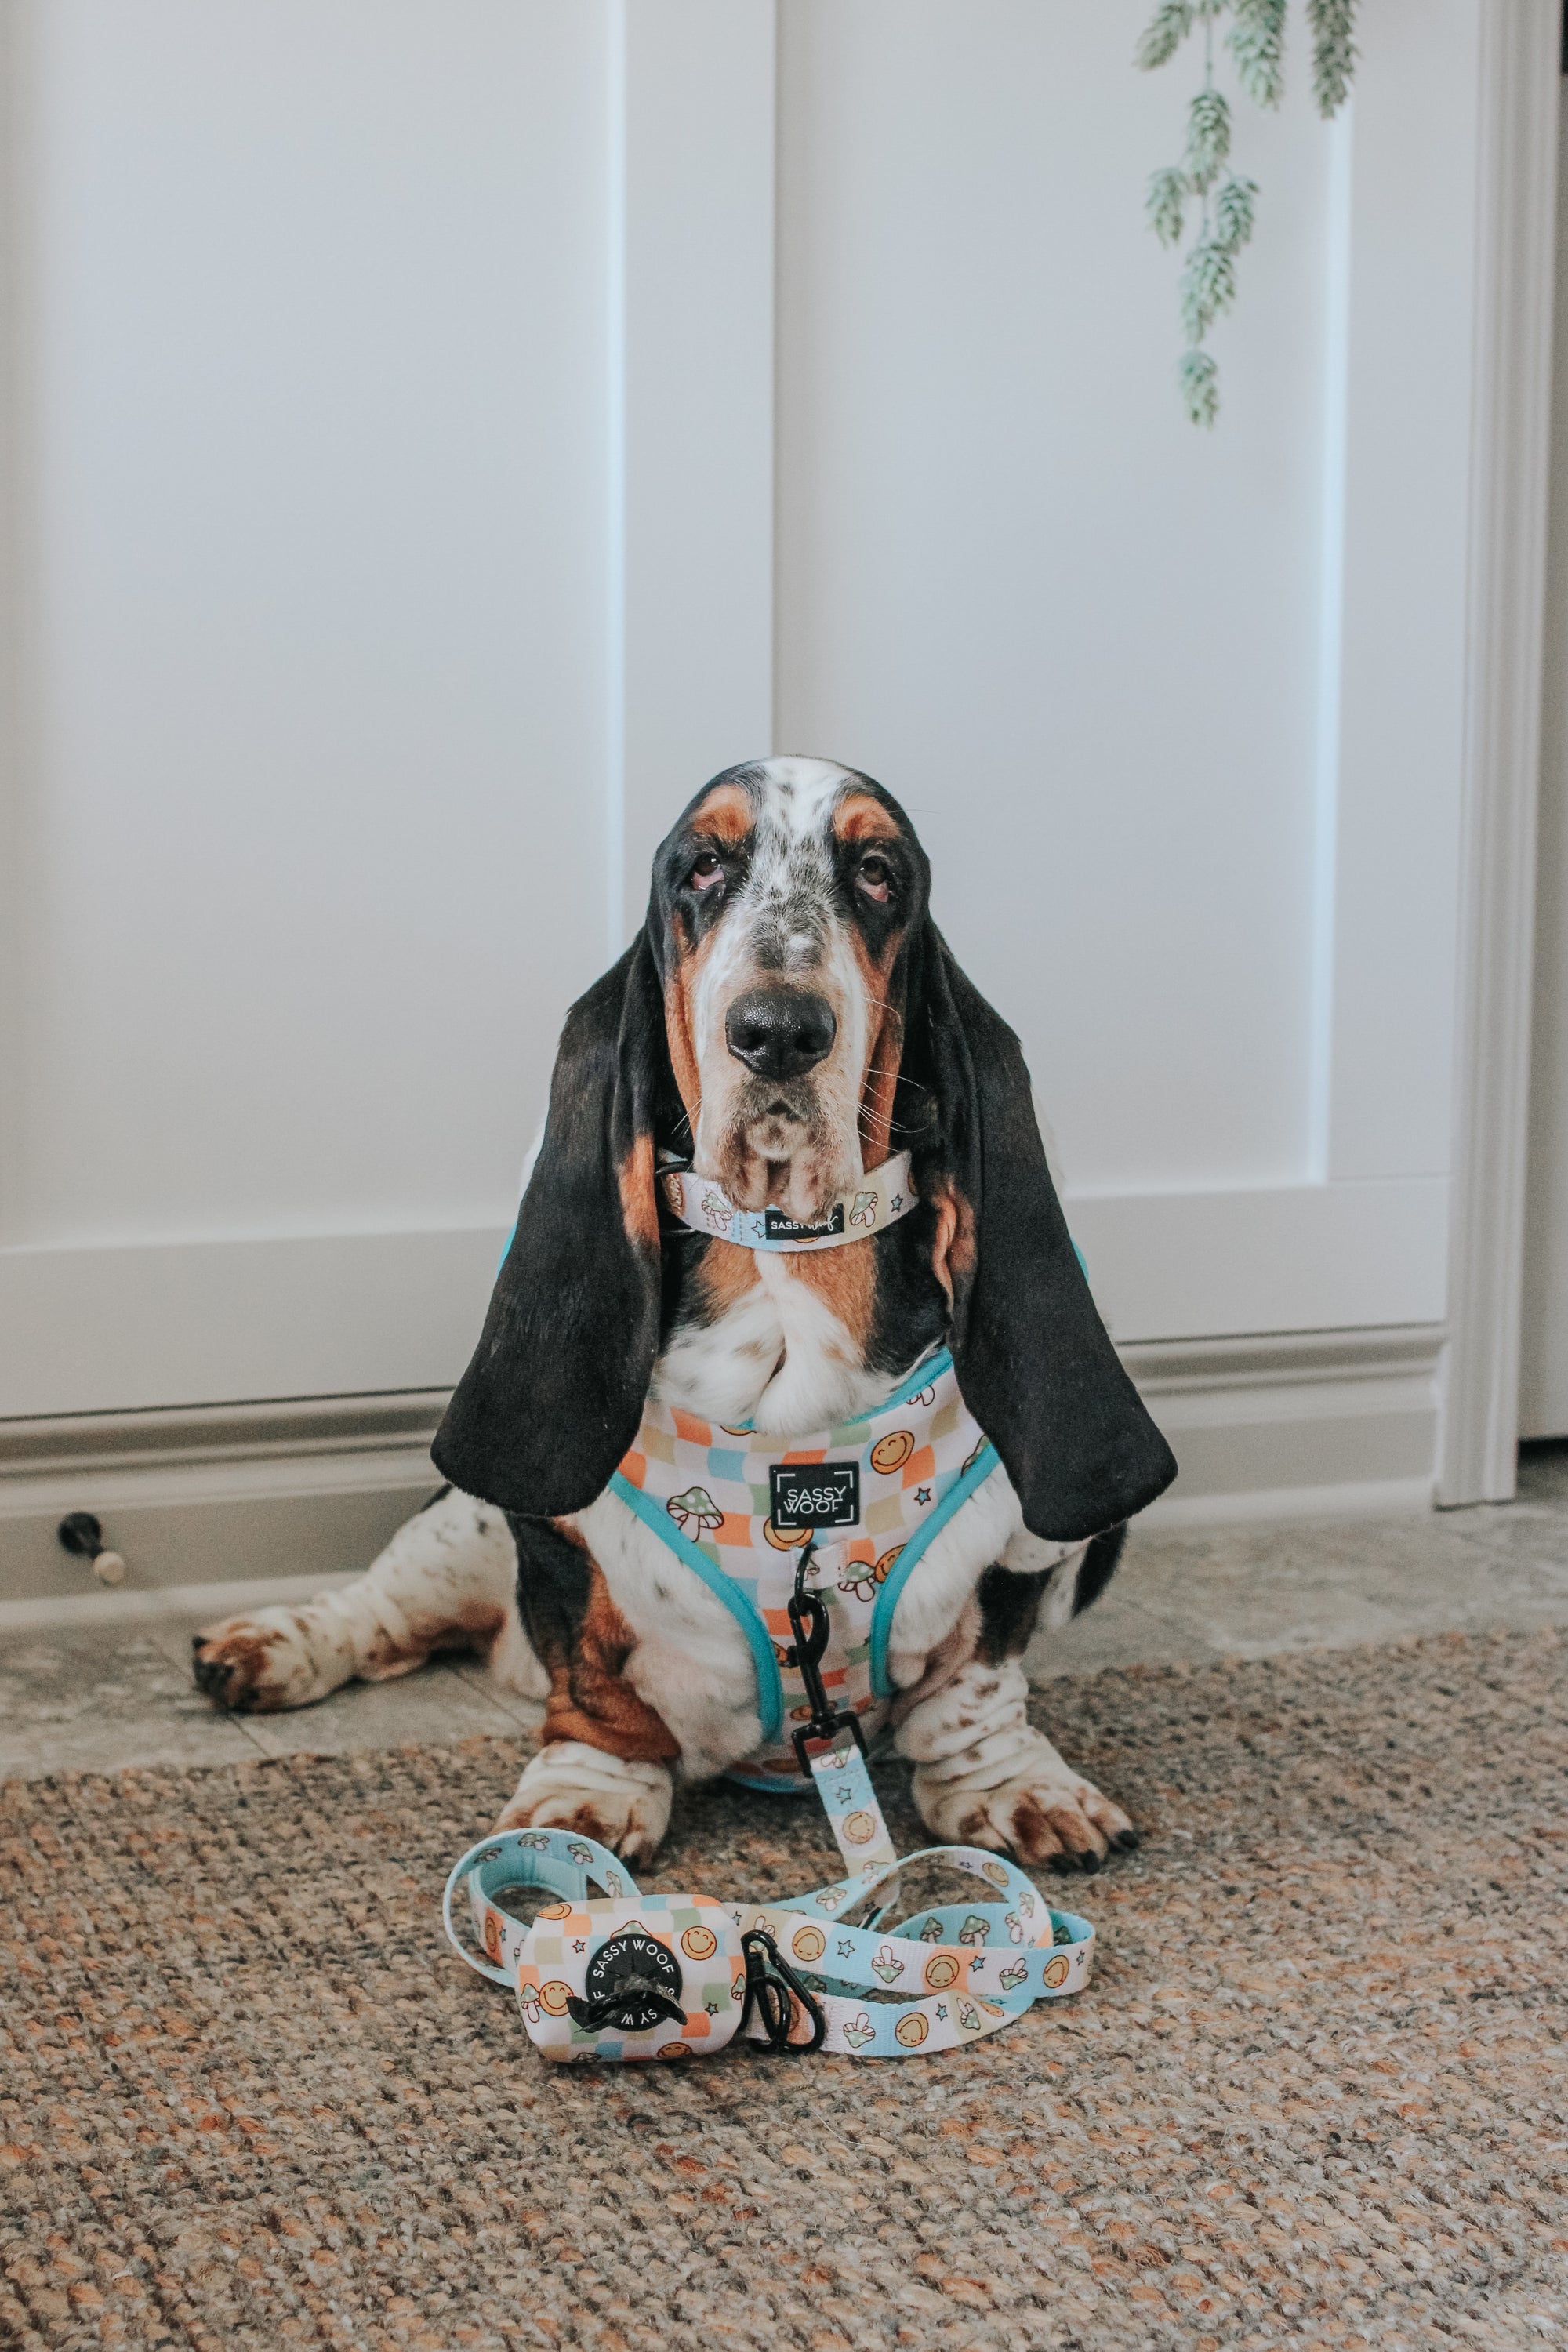 INFLUENCER_CONTENT | @DOLLY_JEAN_THE_BASSET | SIZE L